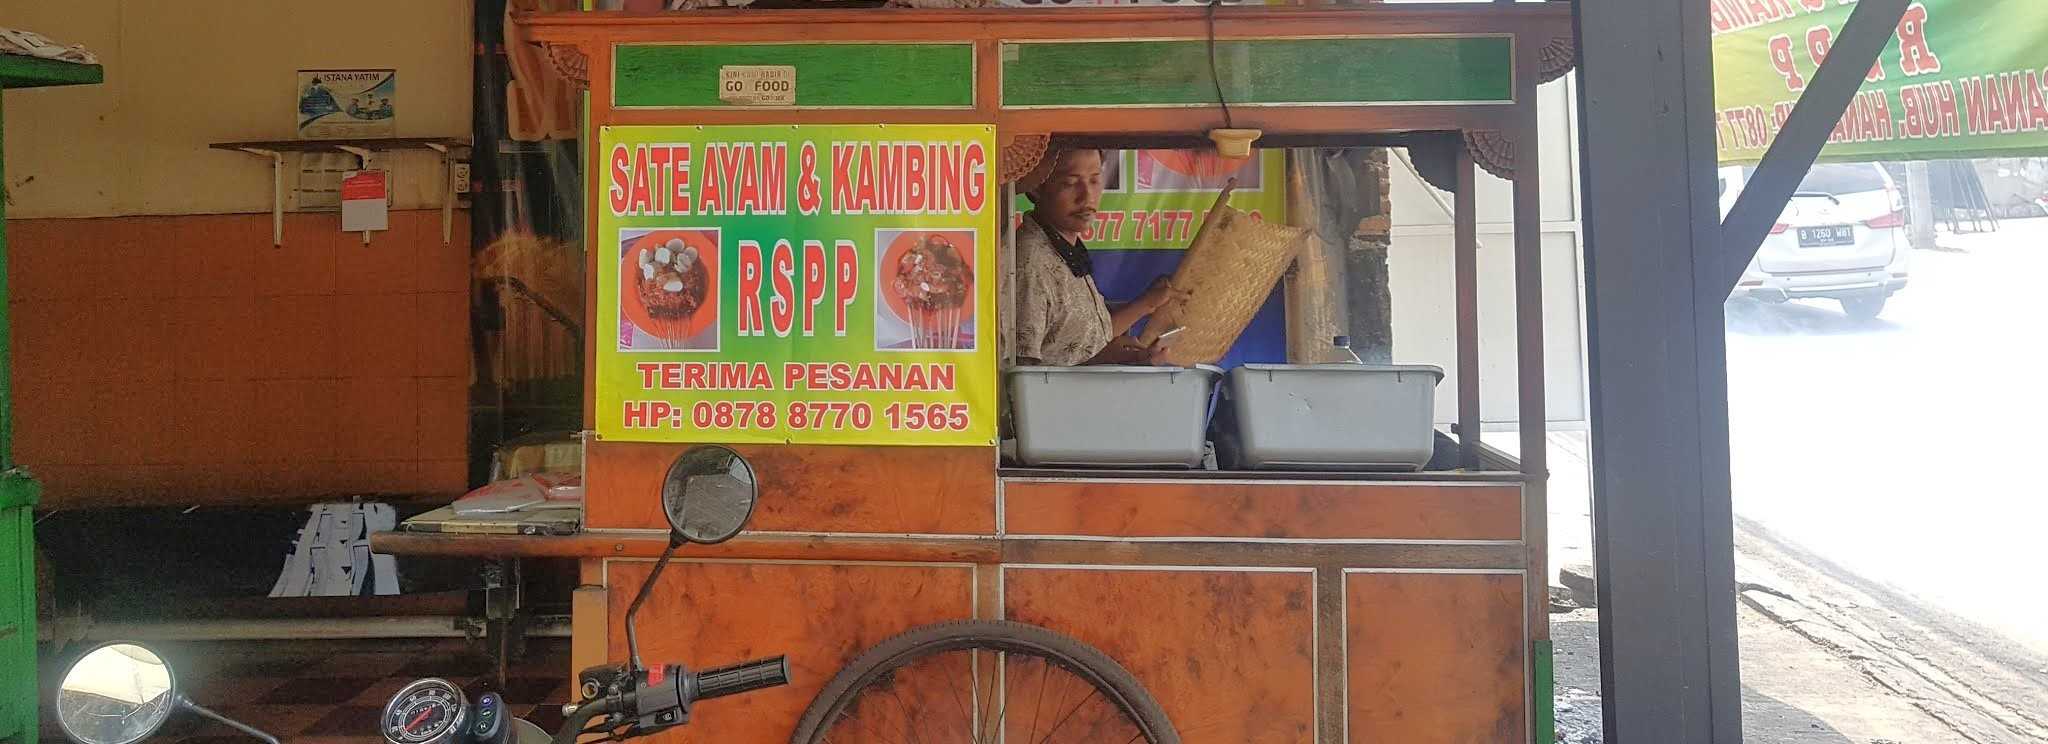 Sate Rspp 1